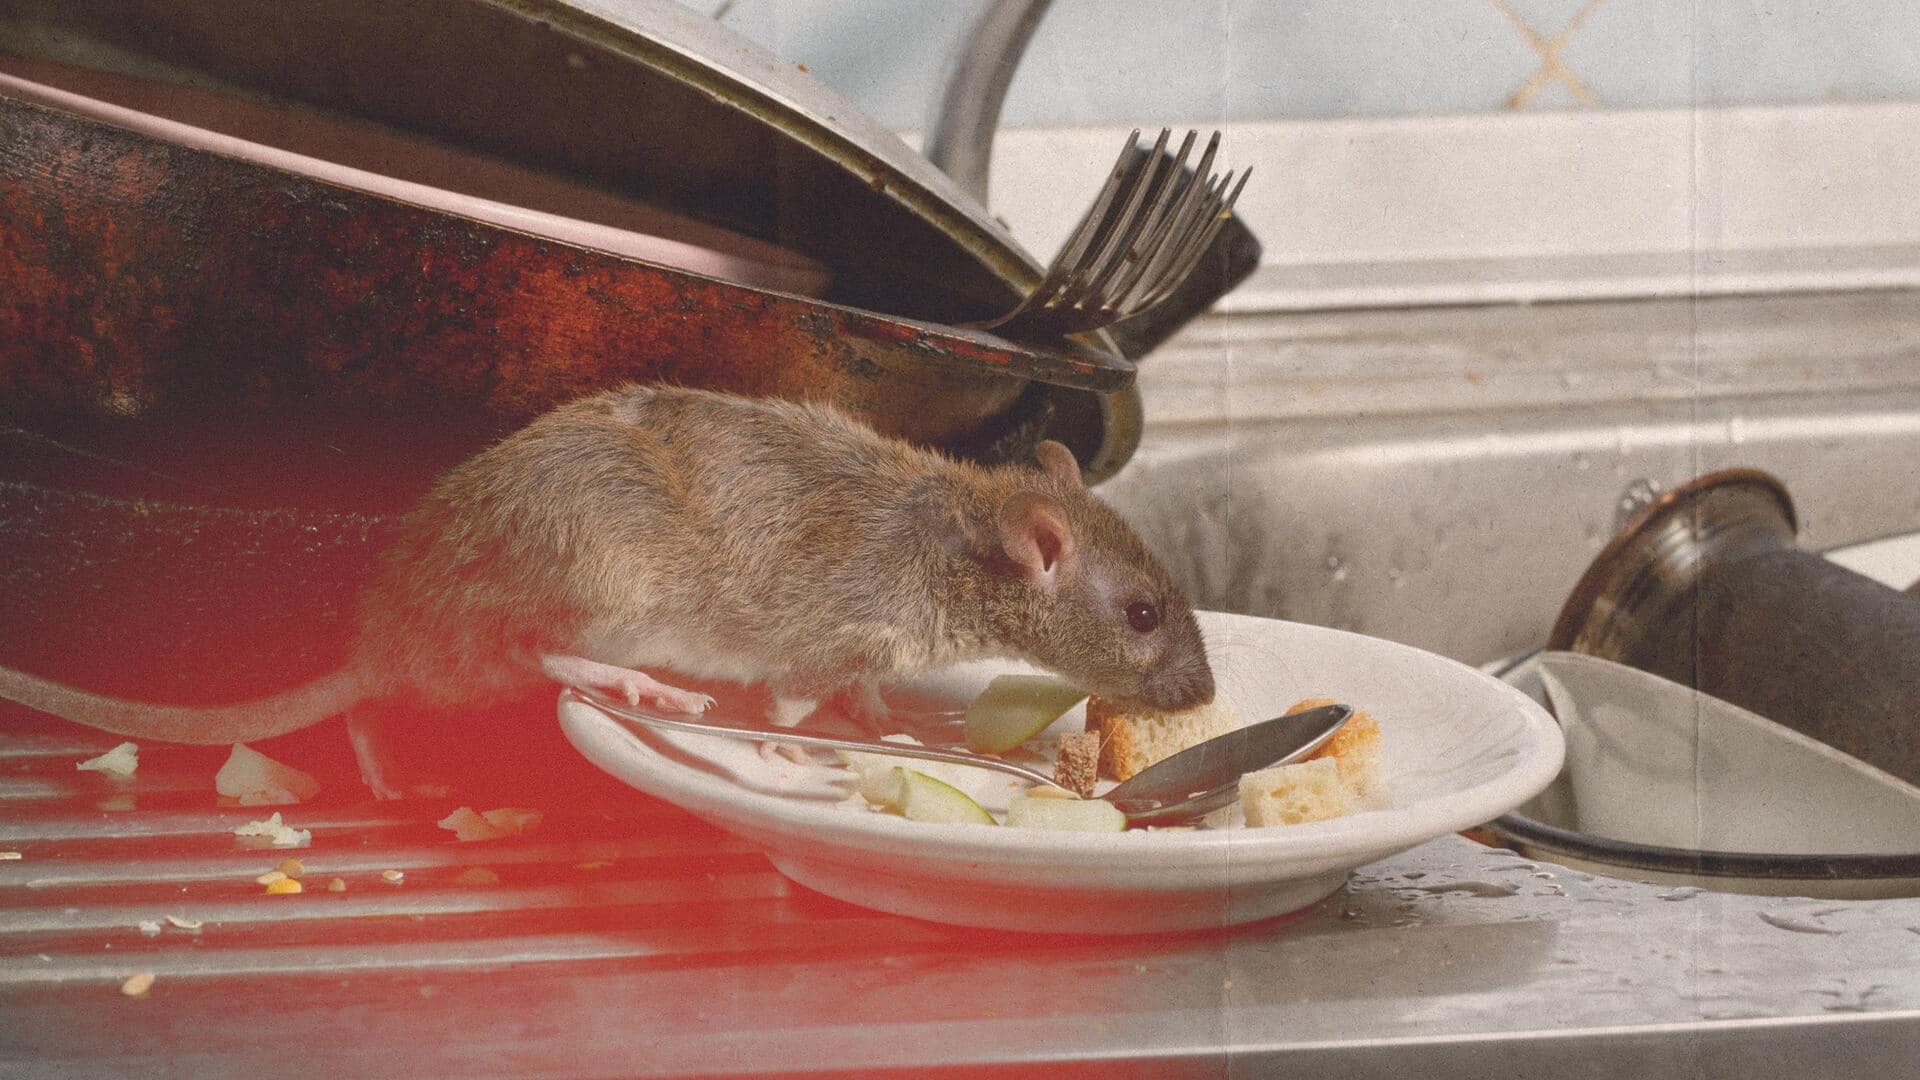 Mumbai: Rat found in restaurant's food; chefs and manager arrested